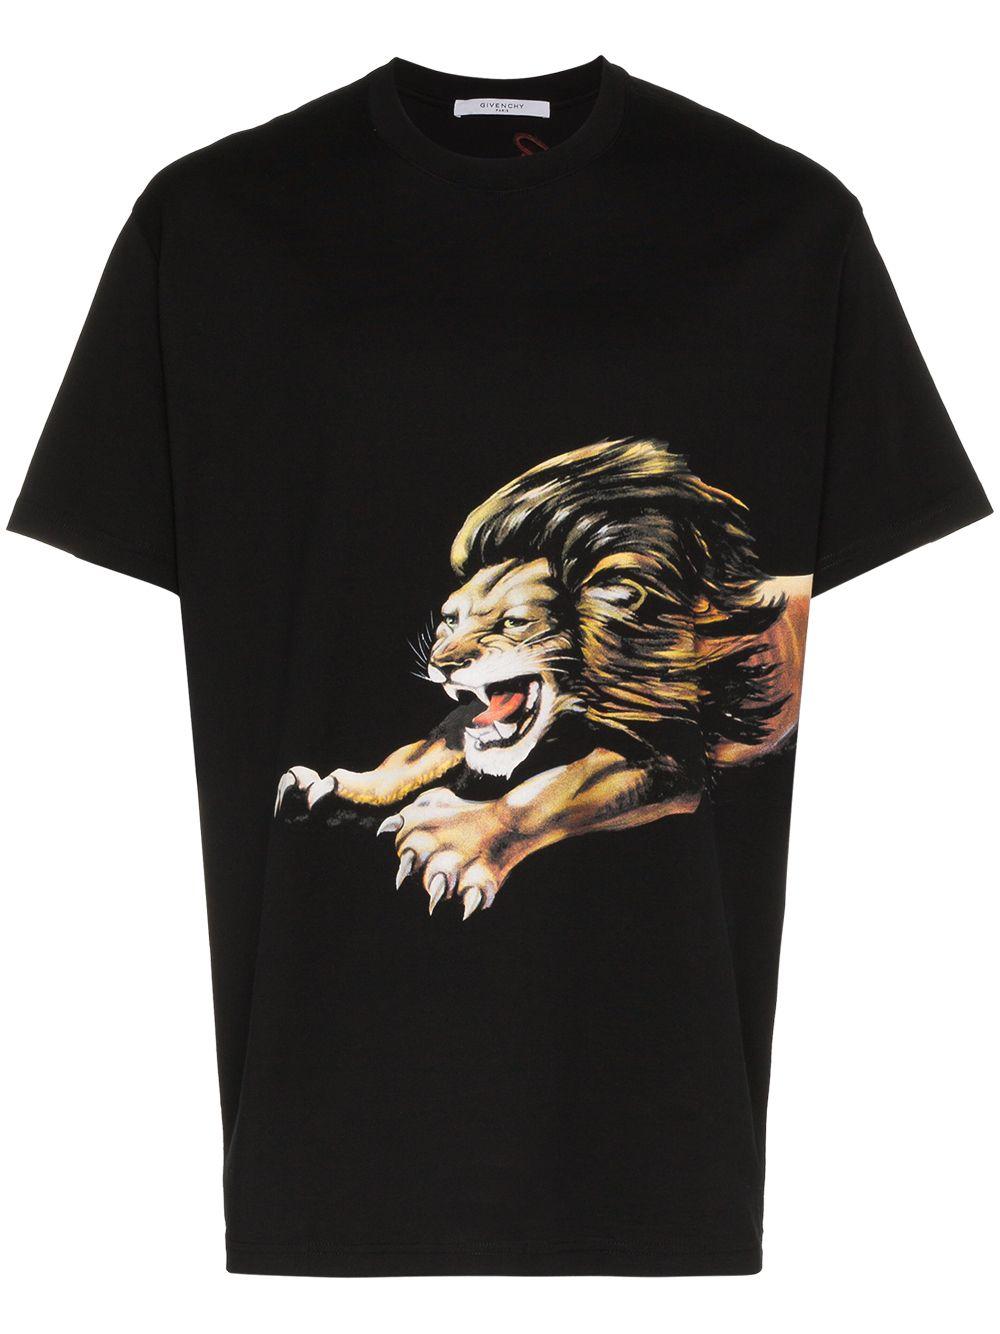 Givenchy Cotton Lion Print T-shirt in Black for Men - Save 8% - Lyst